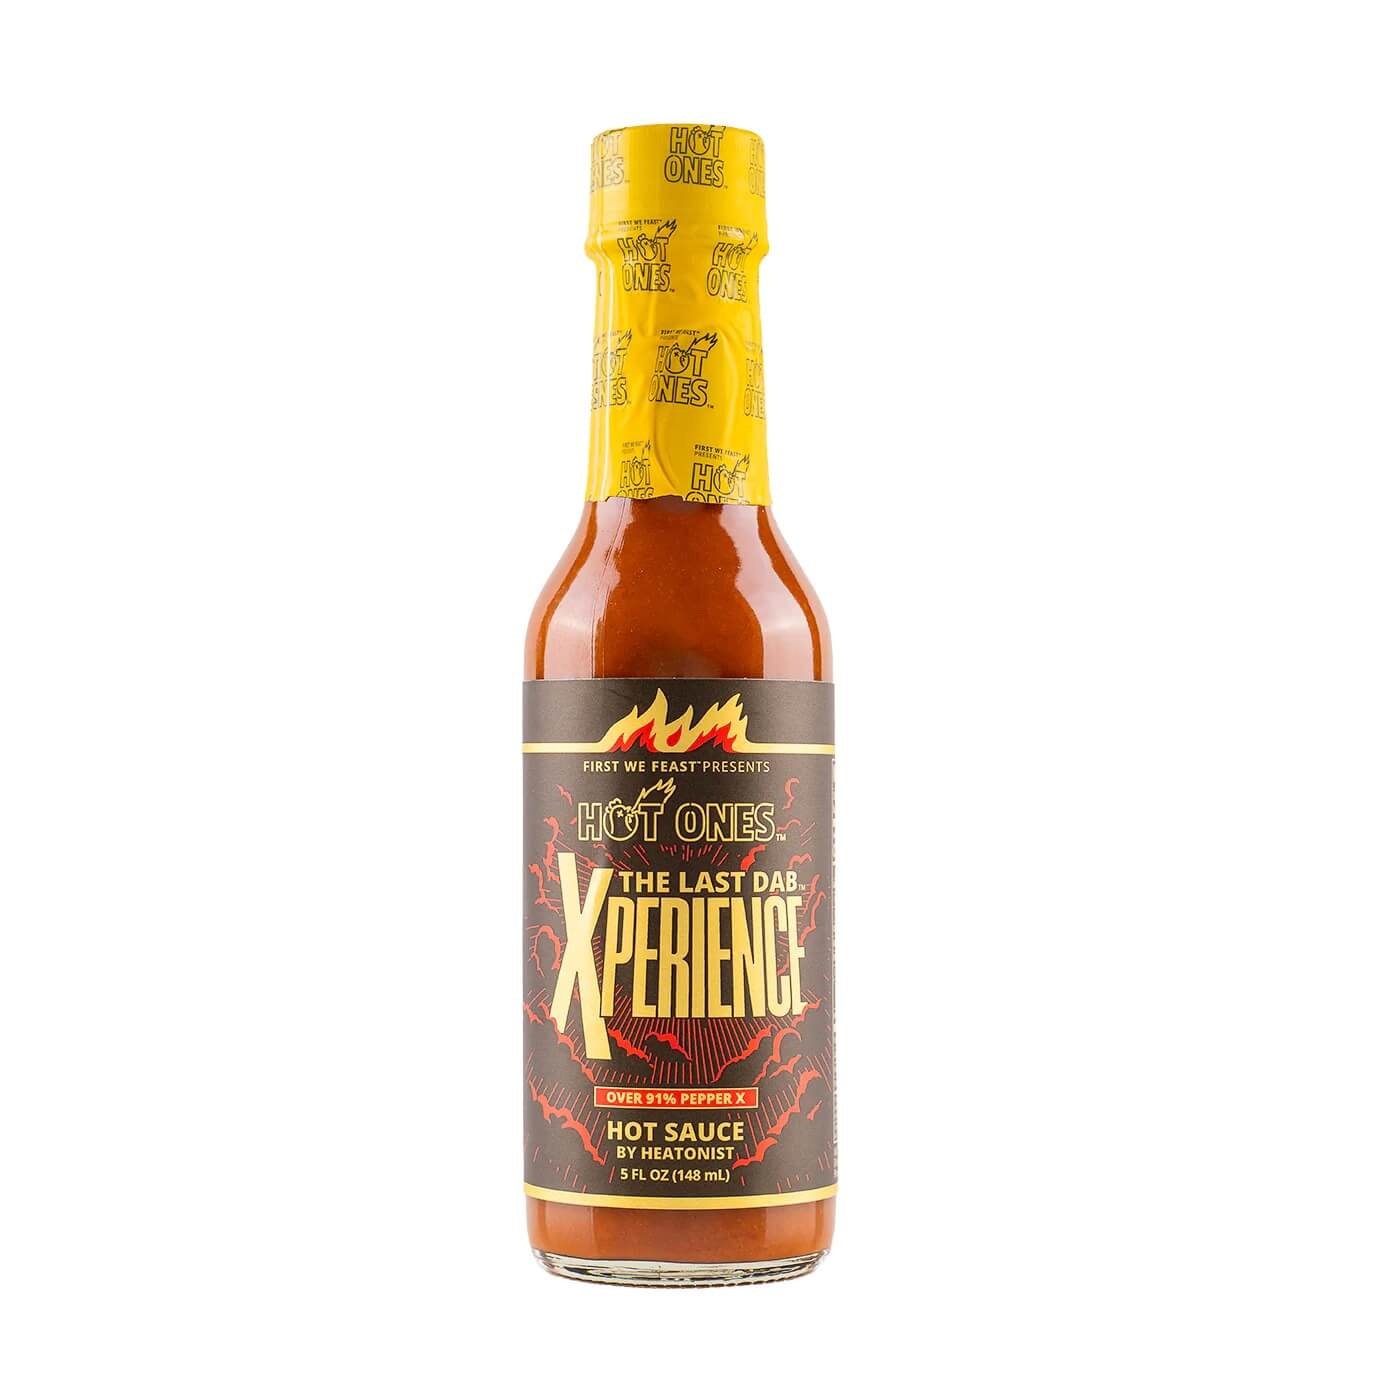 Hot Ones The Last Dab Xperience hot sauce pepper x